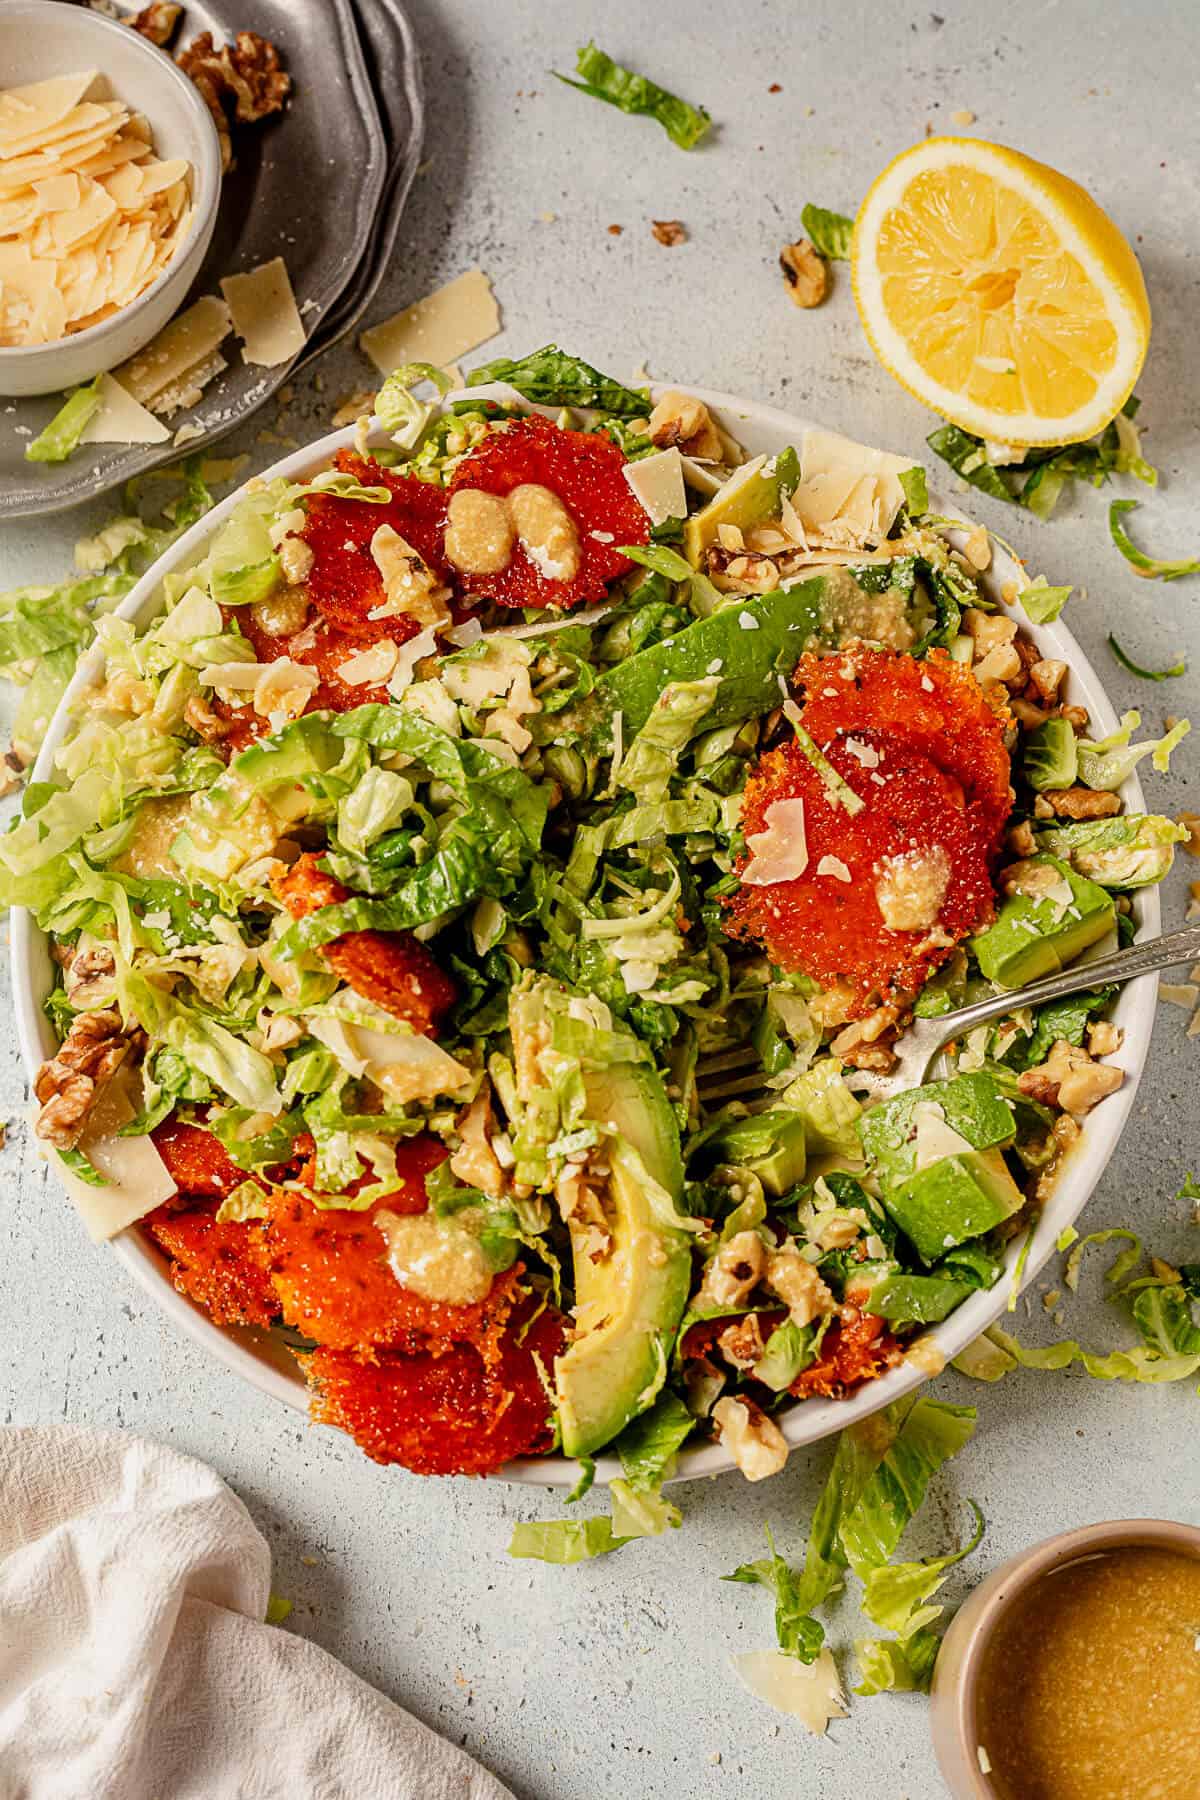 brussels sprout caesar salad with avocado, sweet potatoes, and parmesan cheese